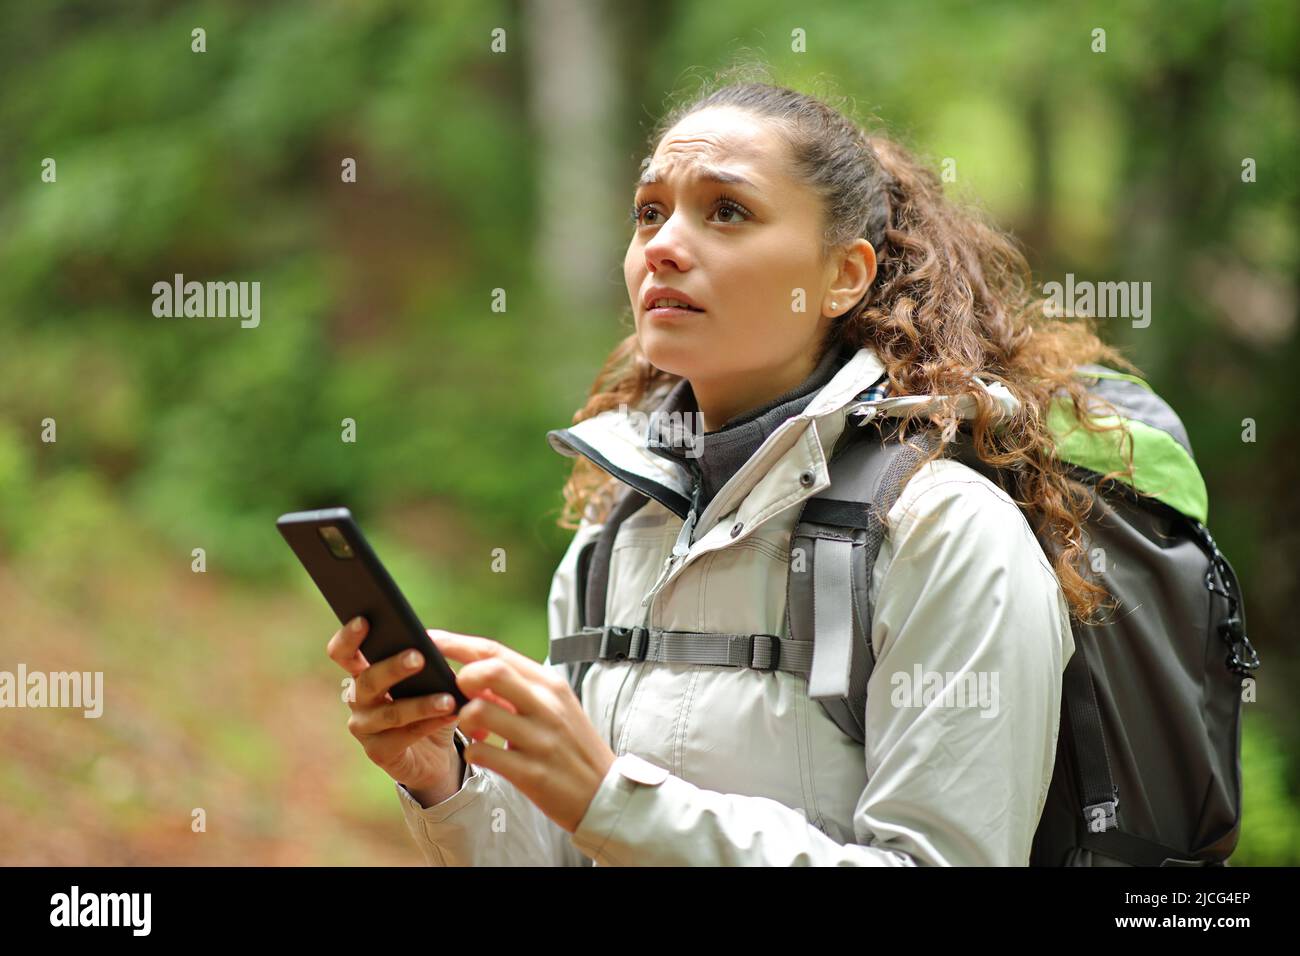 Lost trekker searching location with smart phone alone in a forest Stock Photo